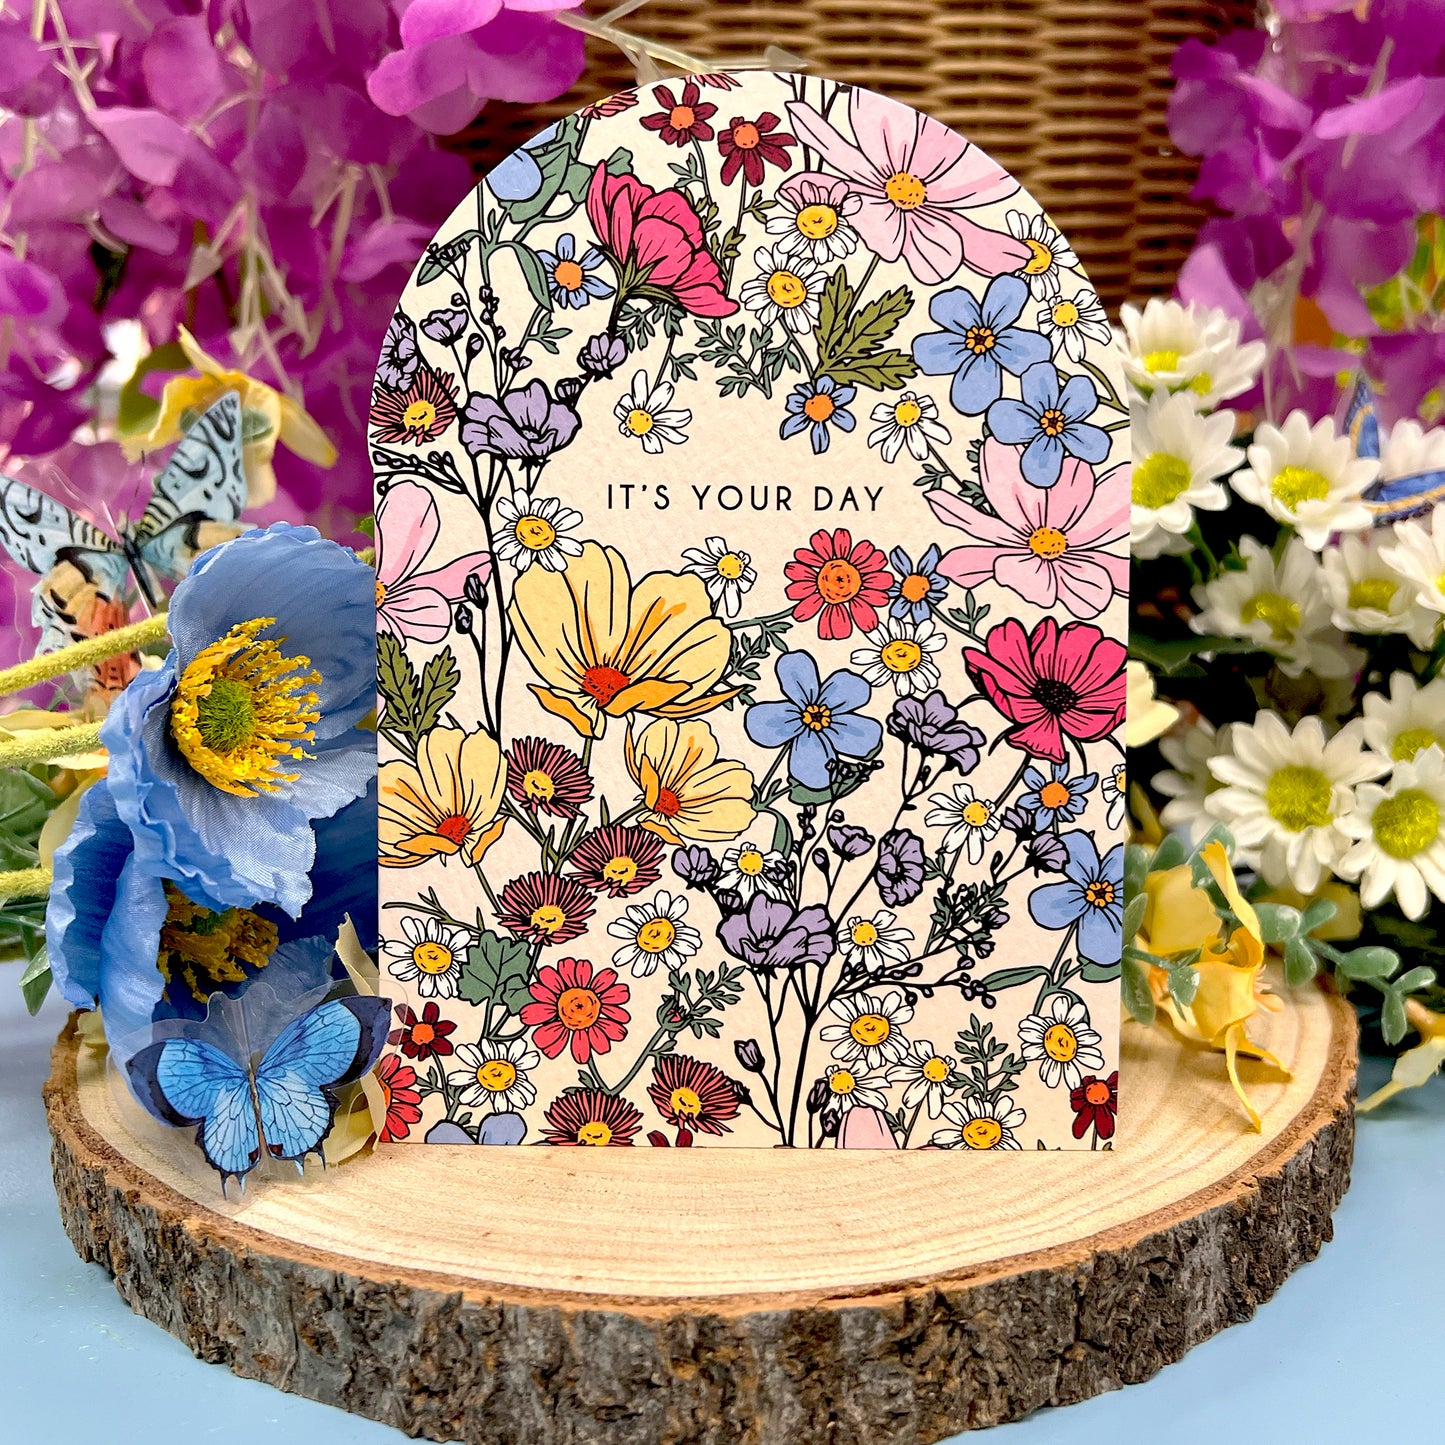 IT'S YOUR DAY SHE'S A WILDFLOWER SCALLOP CARD